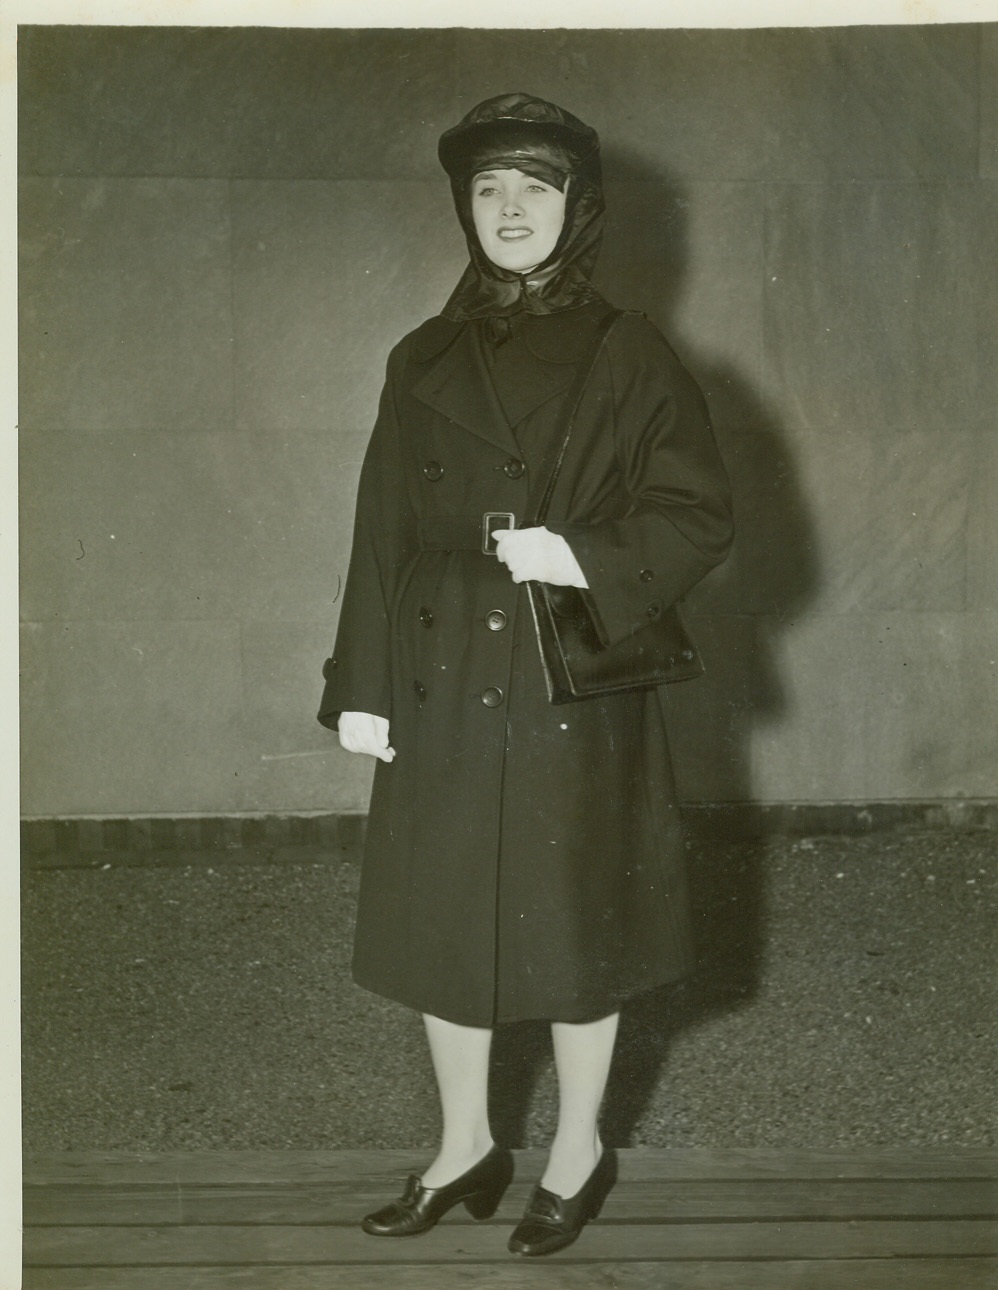 Uniform of Enlisted Wave, 10/1/1942. NEW YORK – Mainbocher designed this navy blue rain outfit that keeps its enlisted wearer as snug against the rains as her commanding officer in the WAVES. Underneath, the Navy enlistee wears a uniform designed like the officers’, except that buttons are black instead of gold, and rating marks on the upper sleeve replace gold braid. The new uniform is modeled by Miss Ellen Allardice. Credit: (ACME);